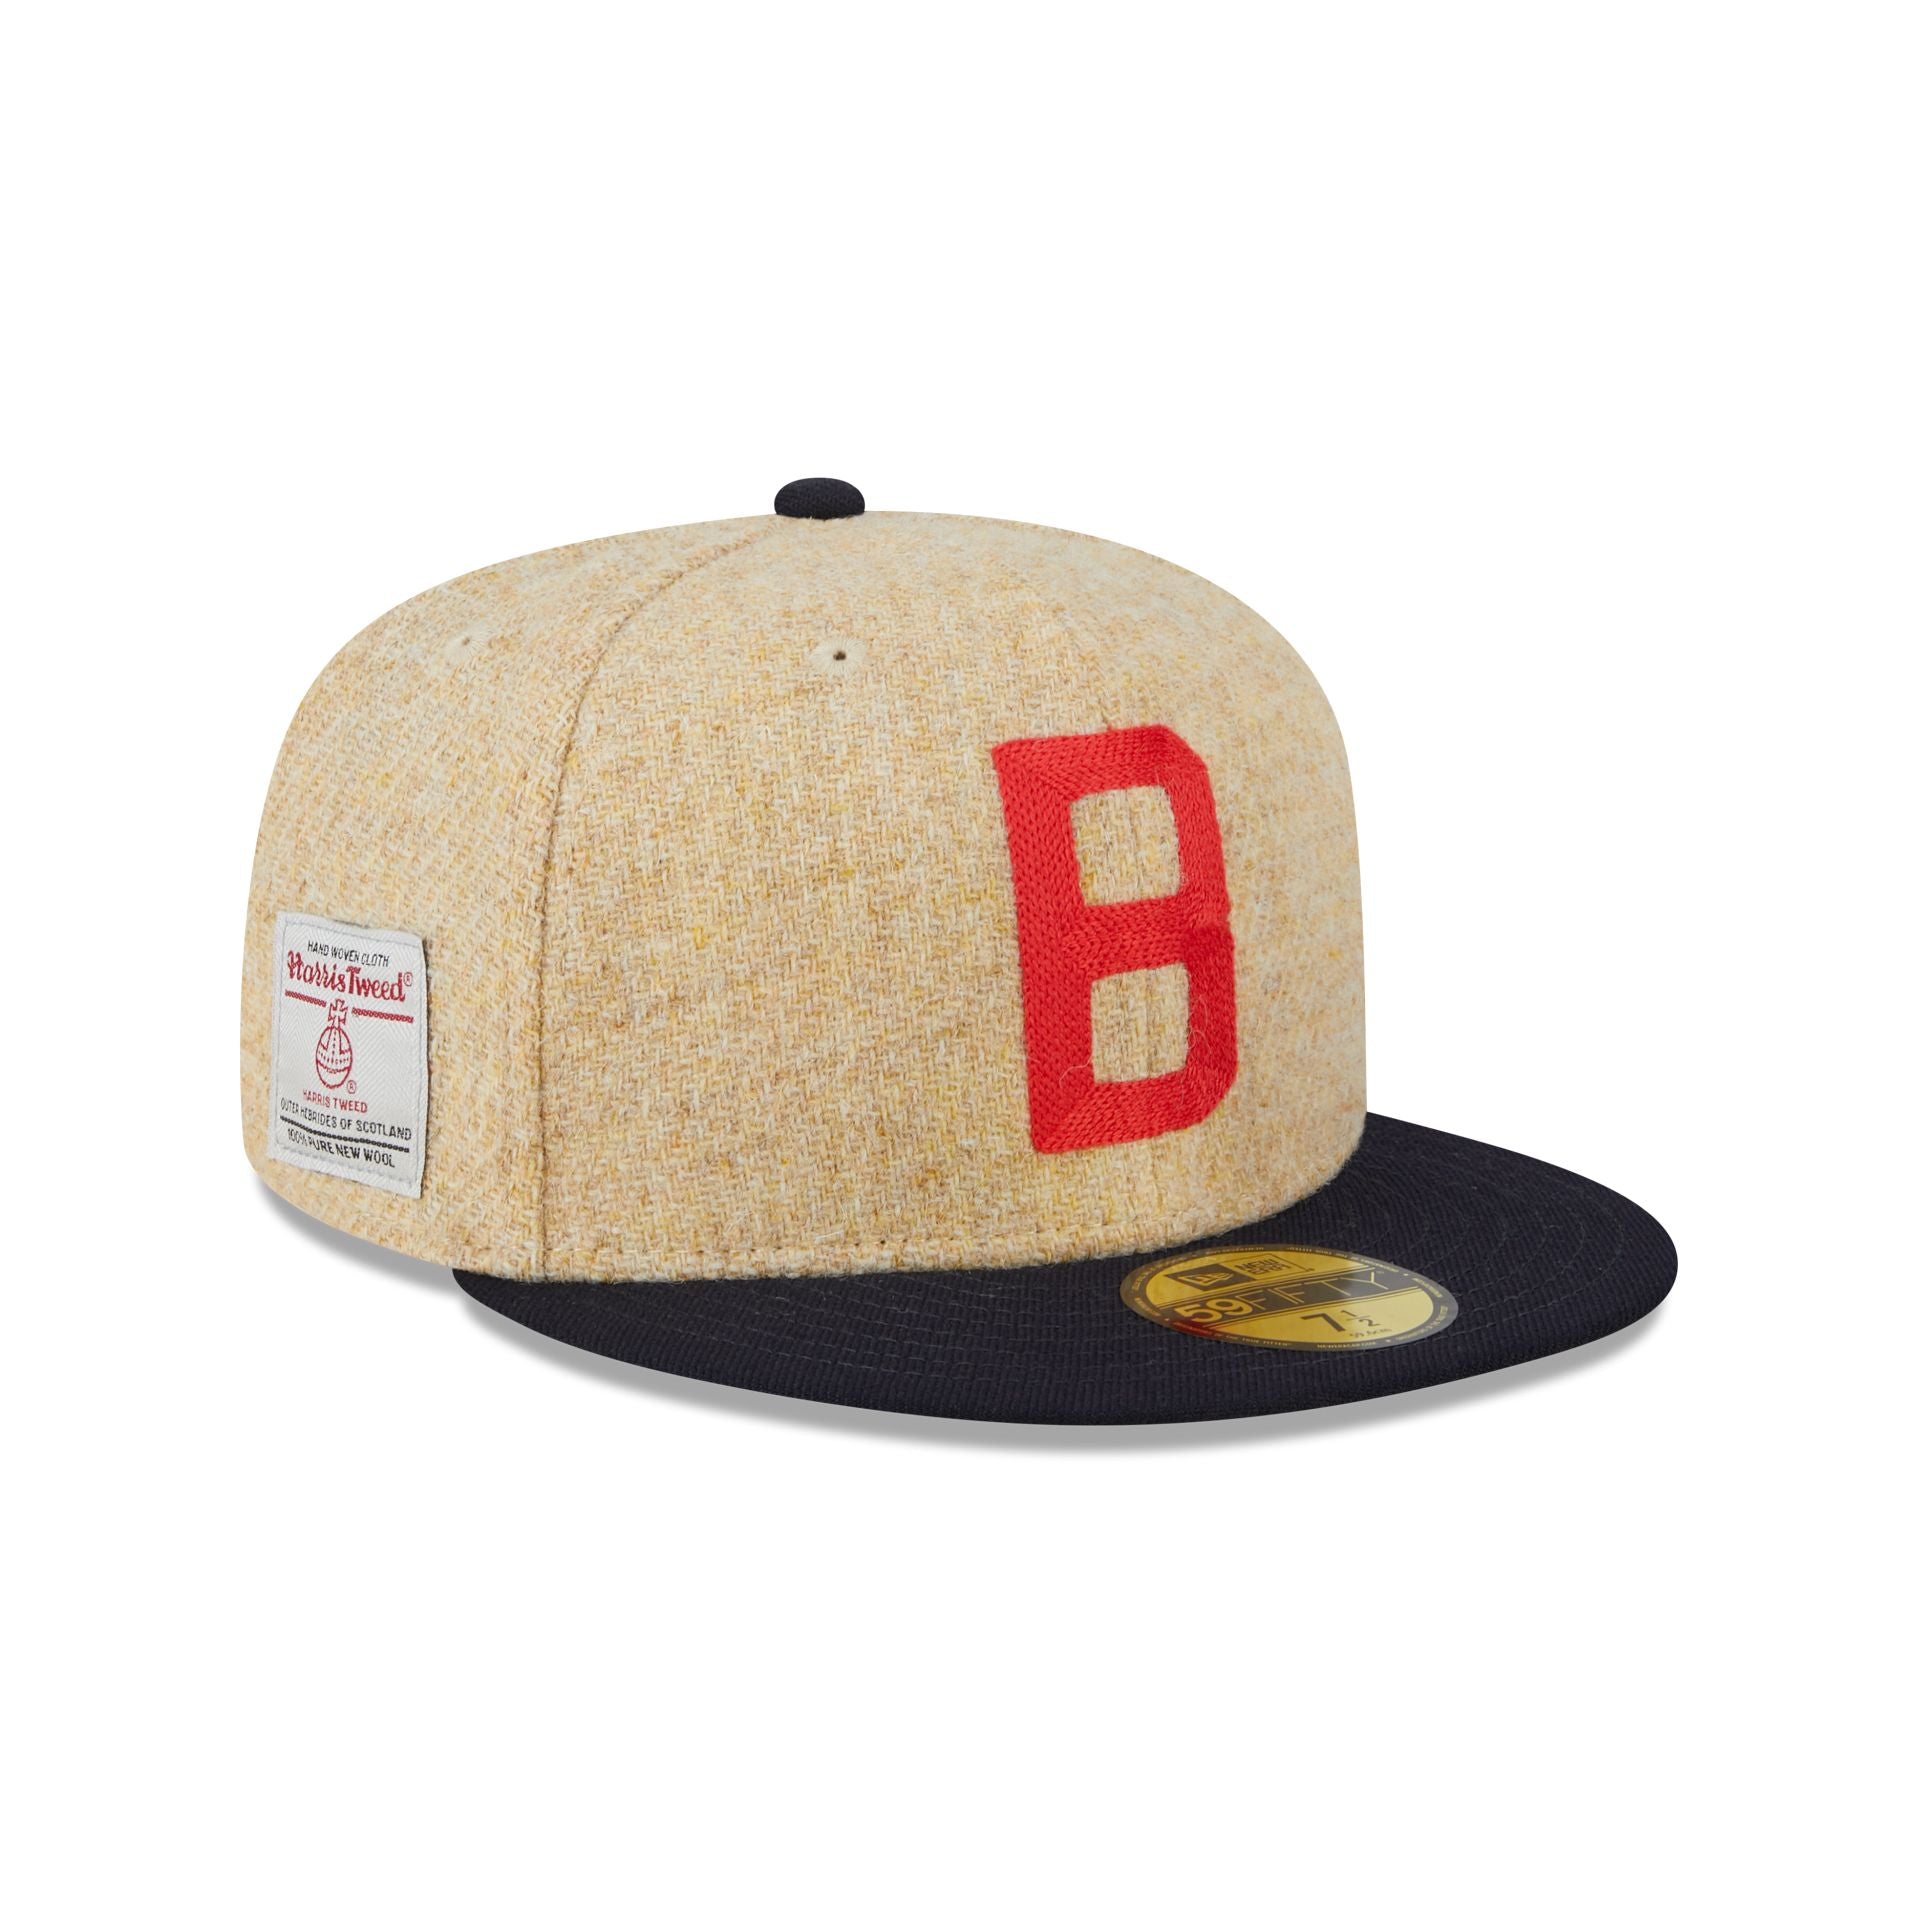 Boston Red Sox (Green) Fitted – Cap World: Embroidery